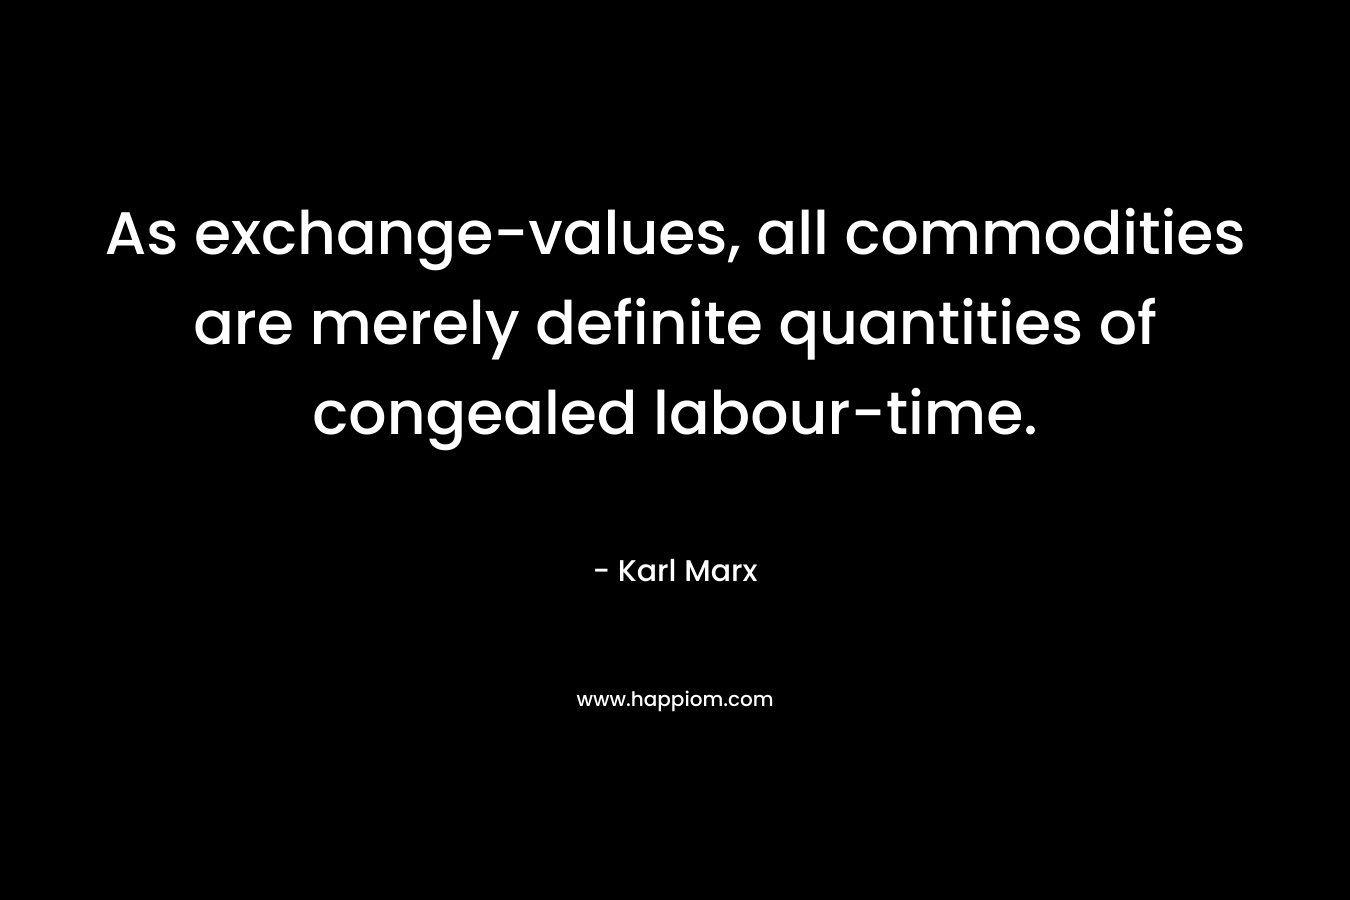 As exchange-values, all commodities are merely definite quantities of congealed labour-time. – Karl Marx